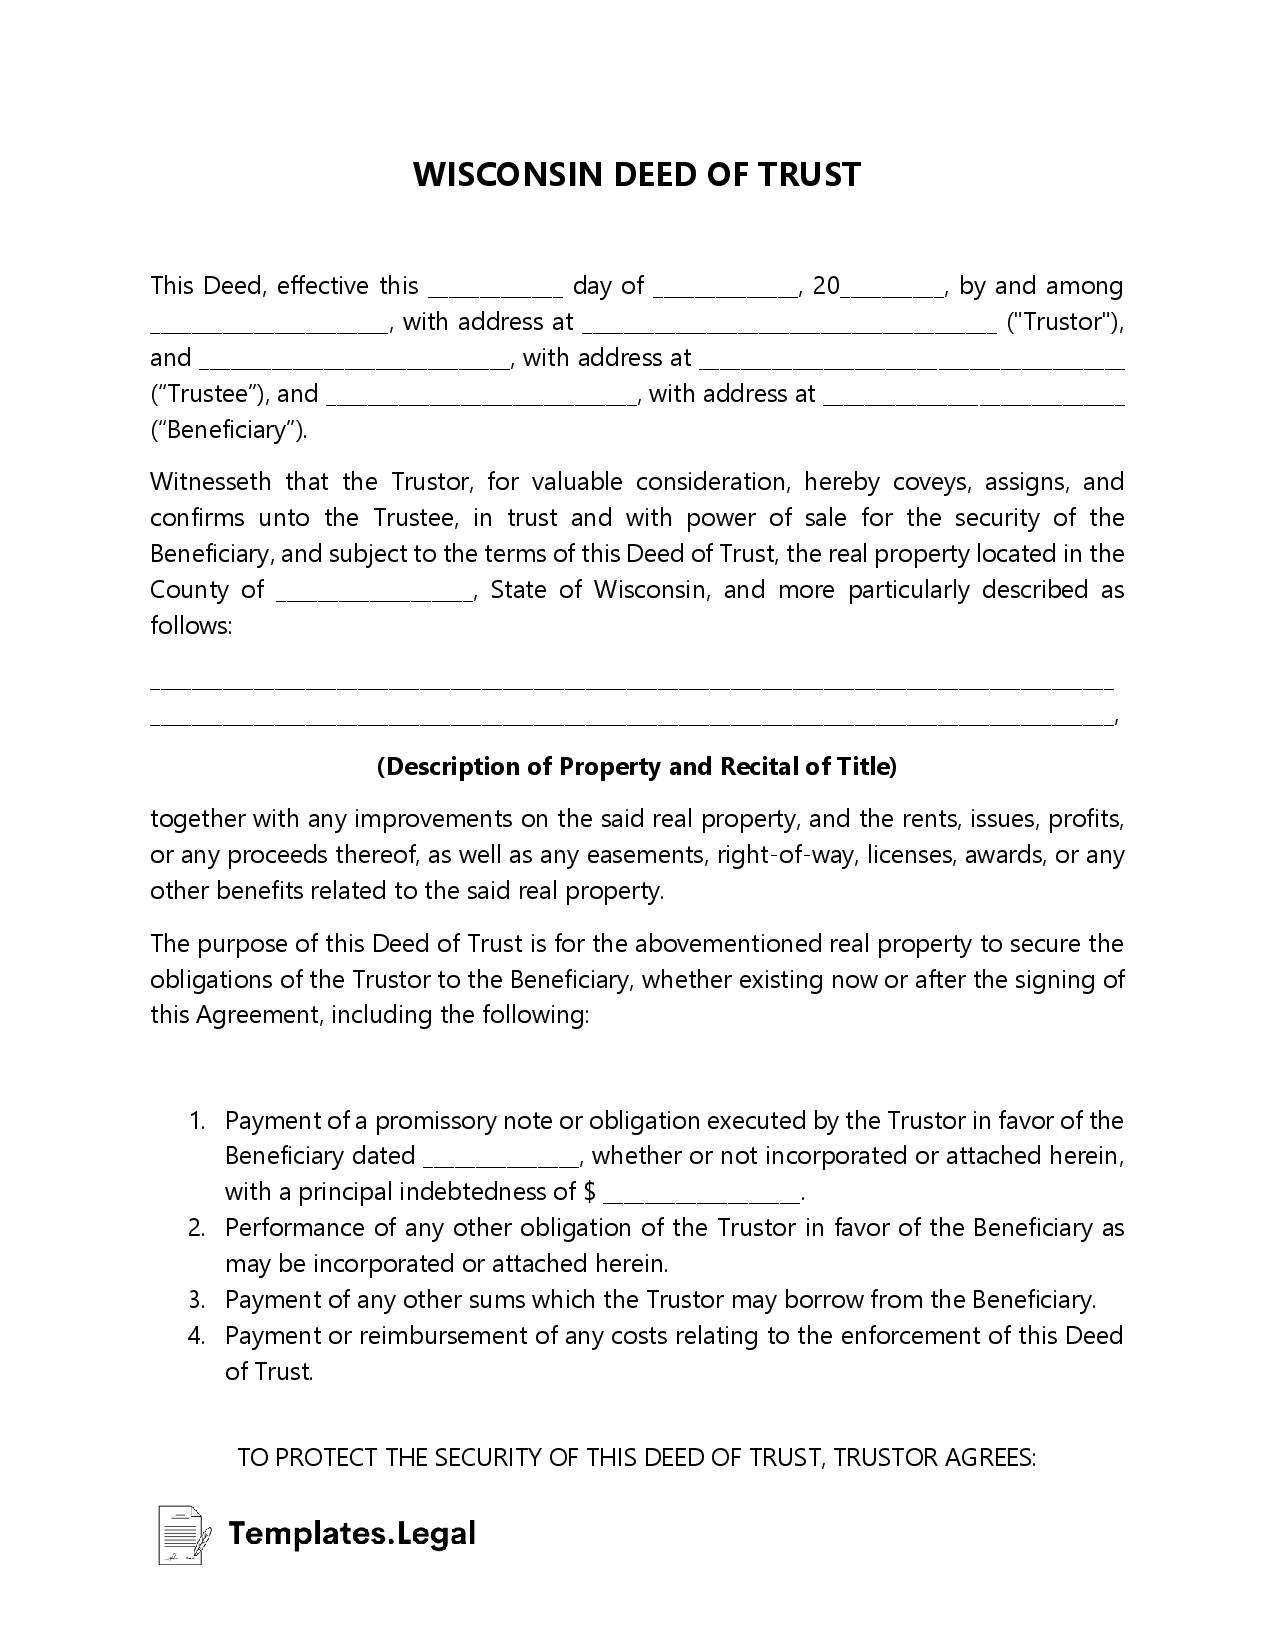 Wisconsin Deed of Trust - Templates.Legal